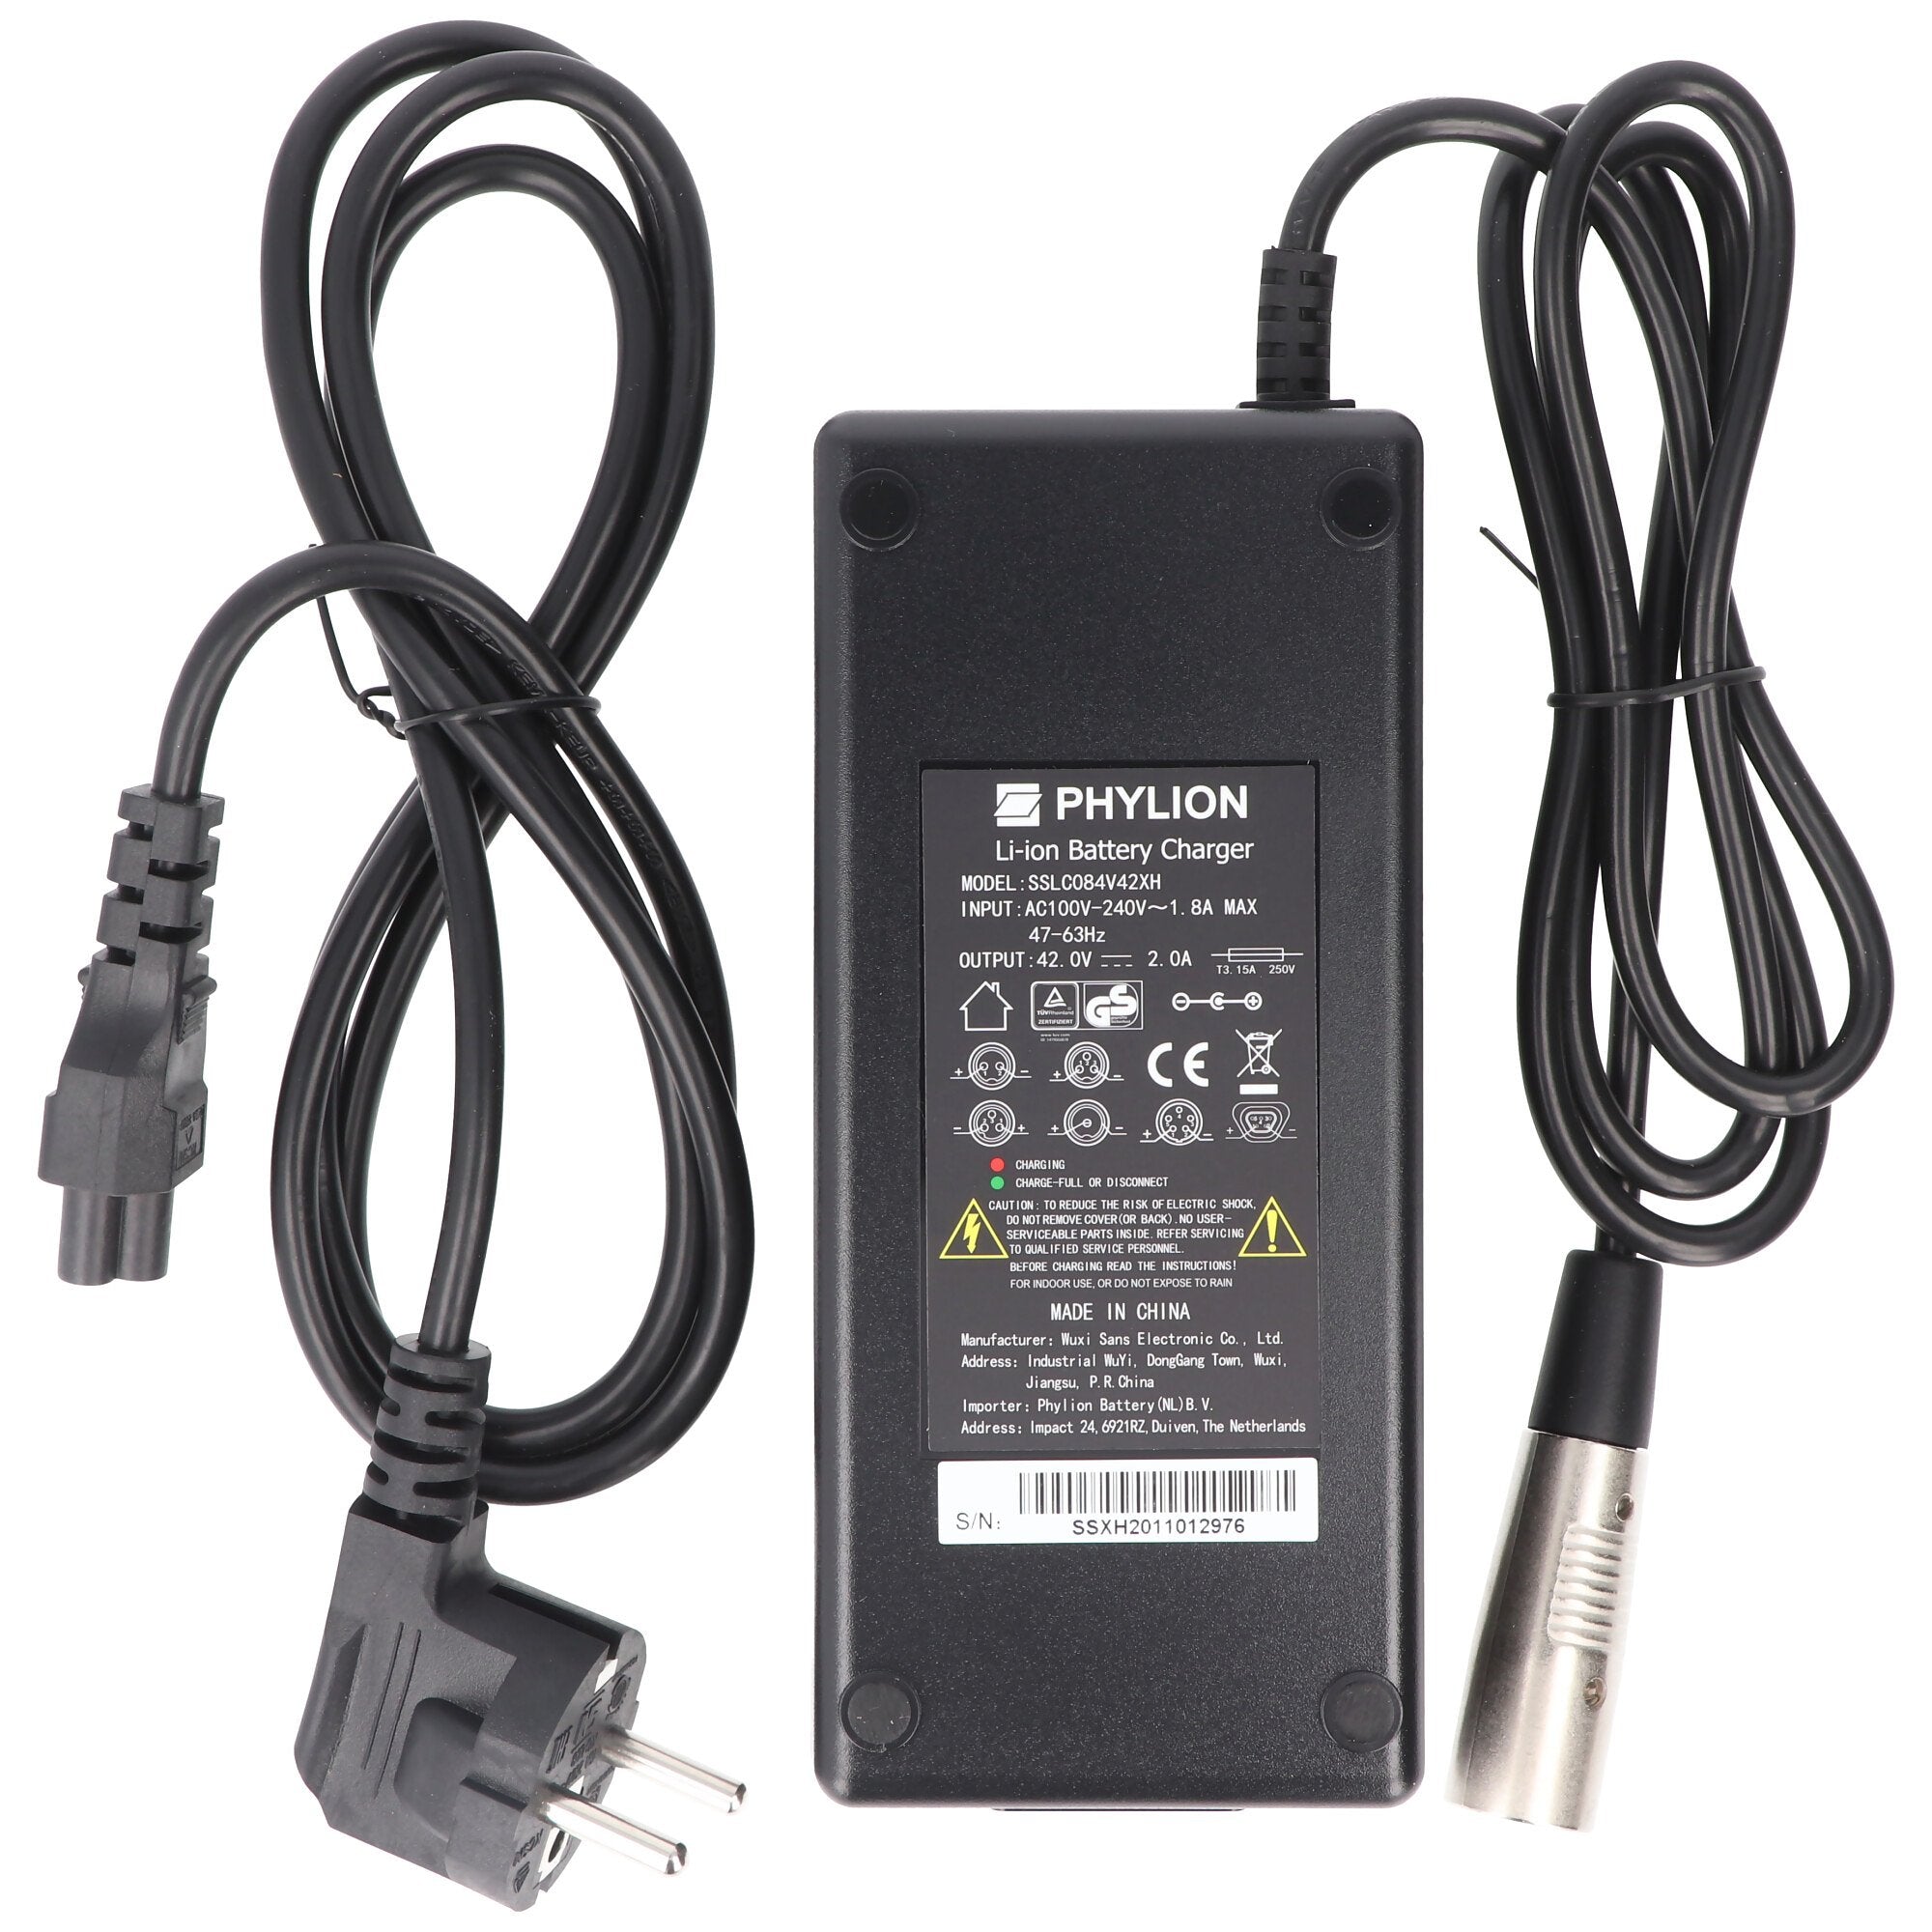 Charger only suitable for Phylion charger 36-42 volts 2.0A XLR 3-pin